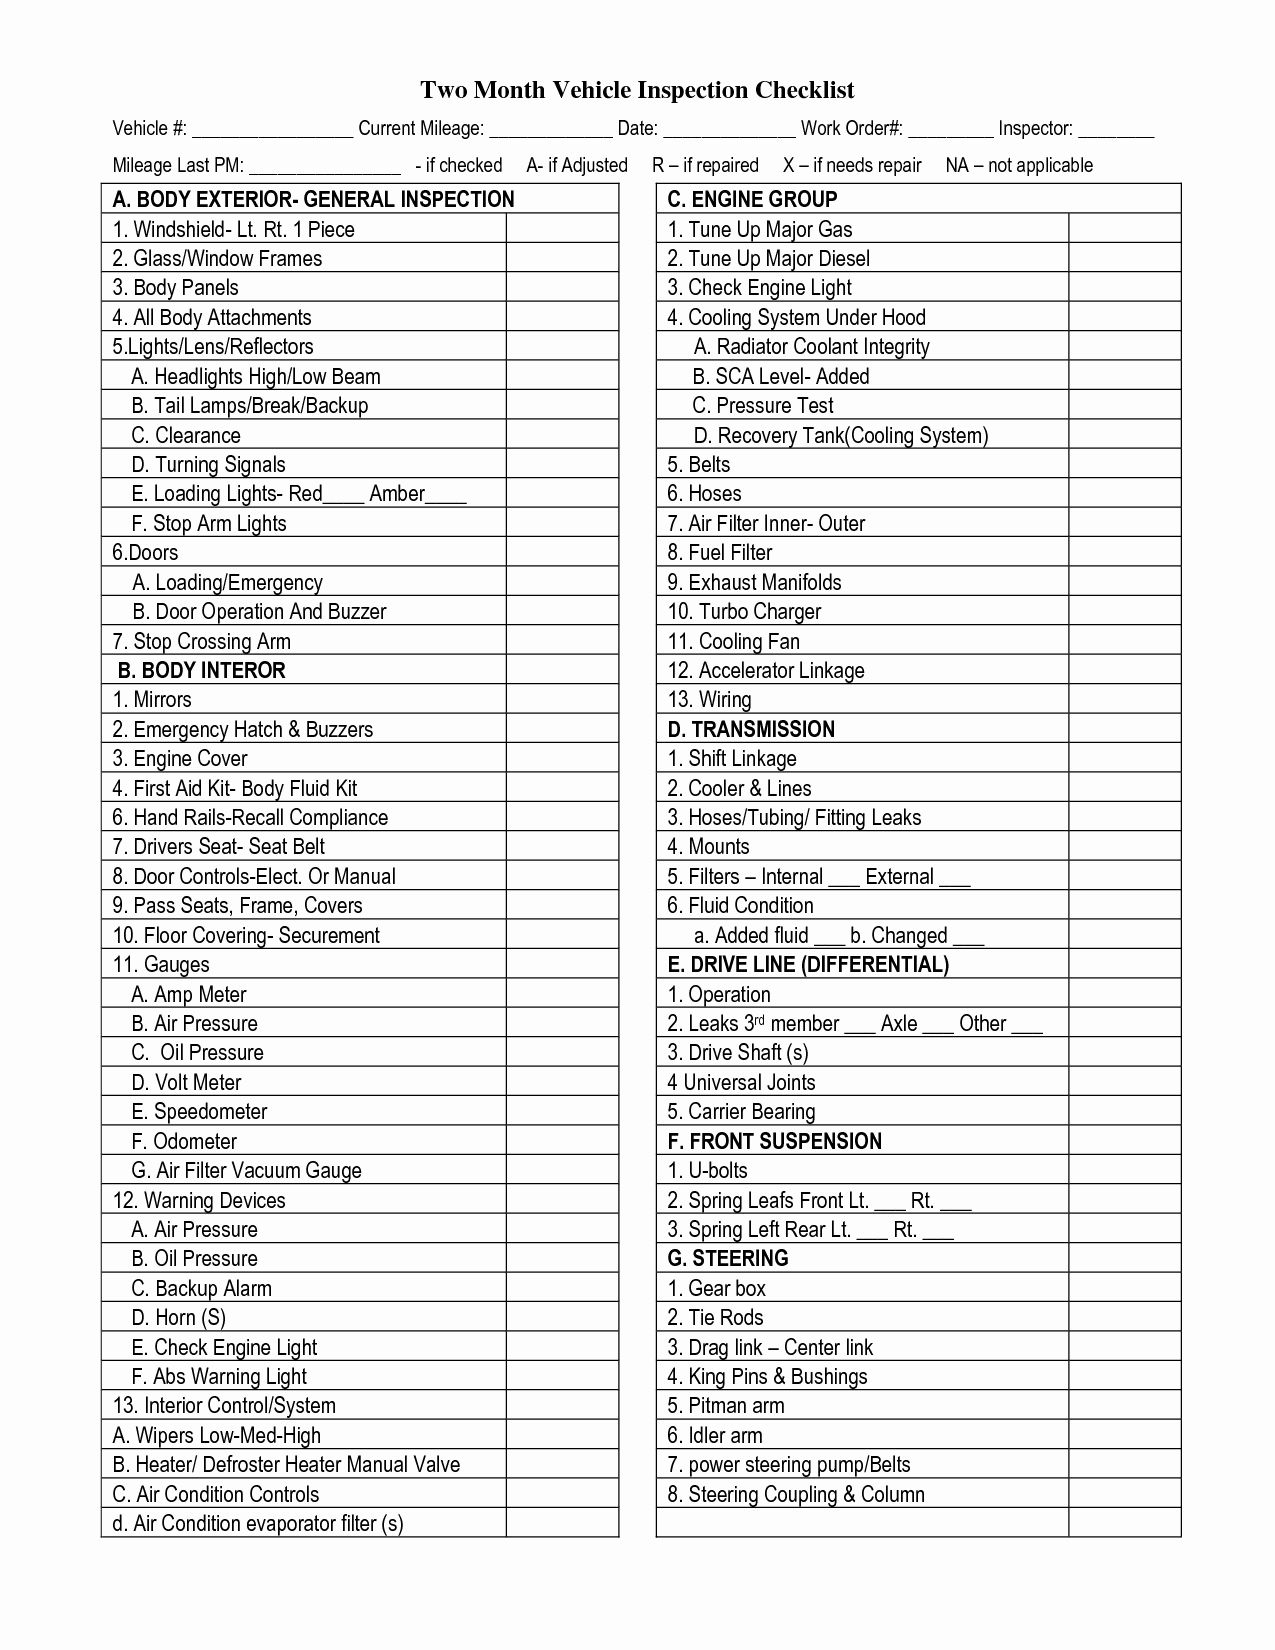 Vehicle Inspection Checklist Template Awesome Vehicle Inspection Checklist Template